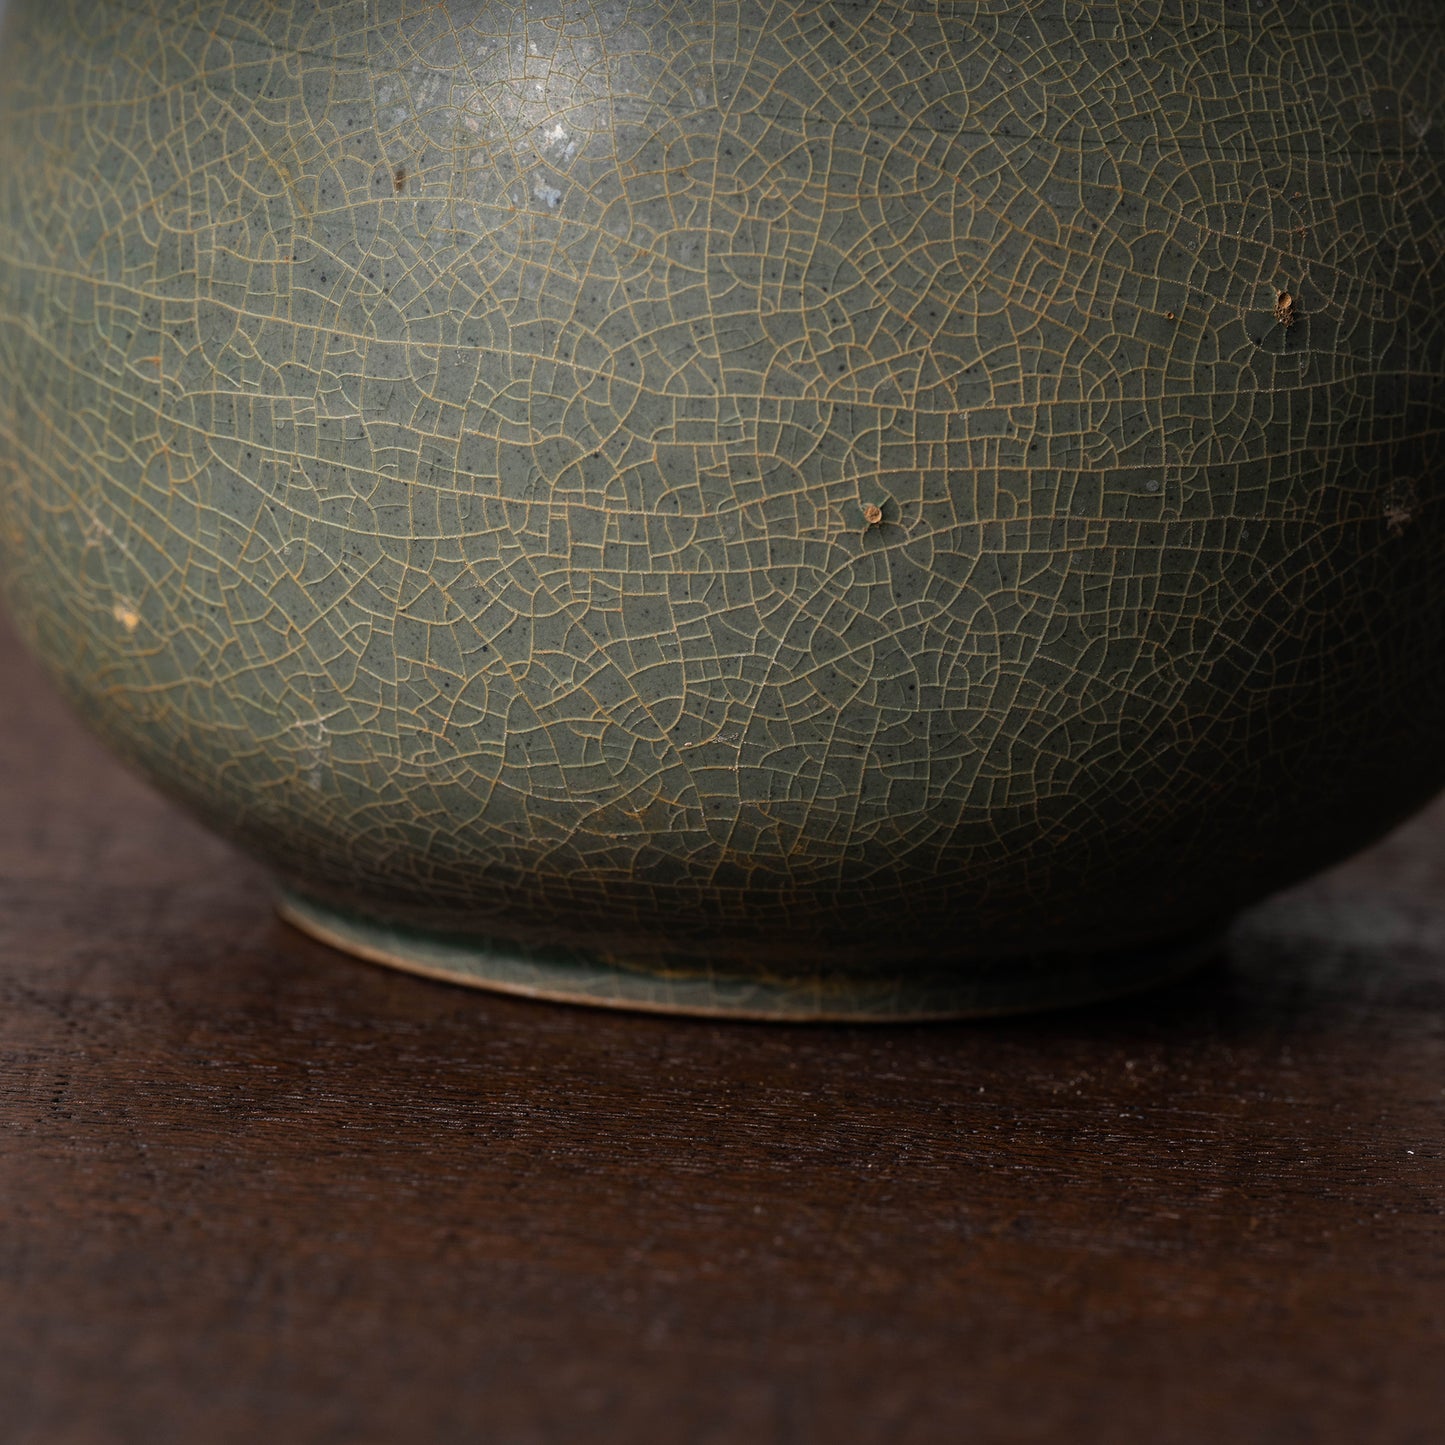 Northern Song Dynasty Yue ware Jar with Four Handles